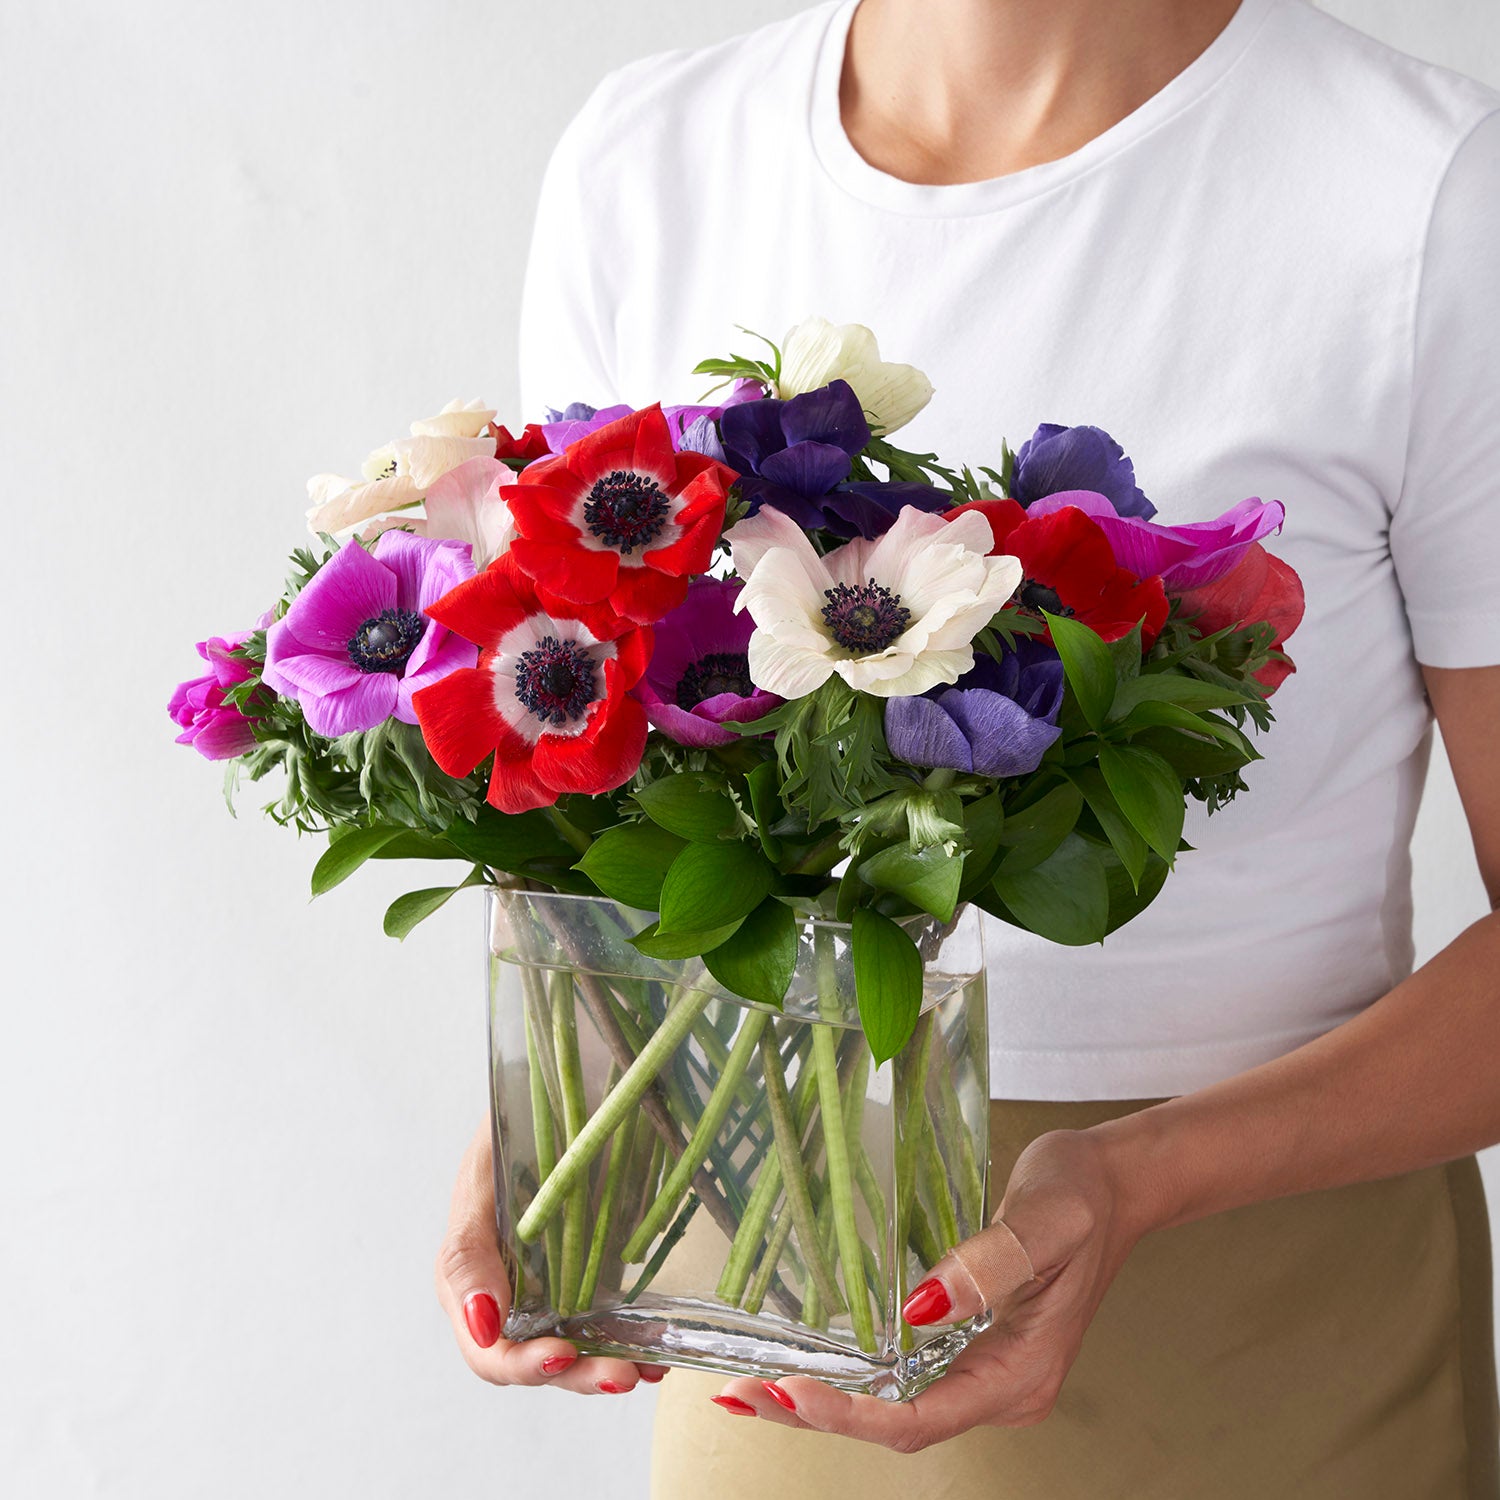 Woman in white shirt holding clear glass vase filled with multi coloured anemonie flowers.